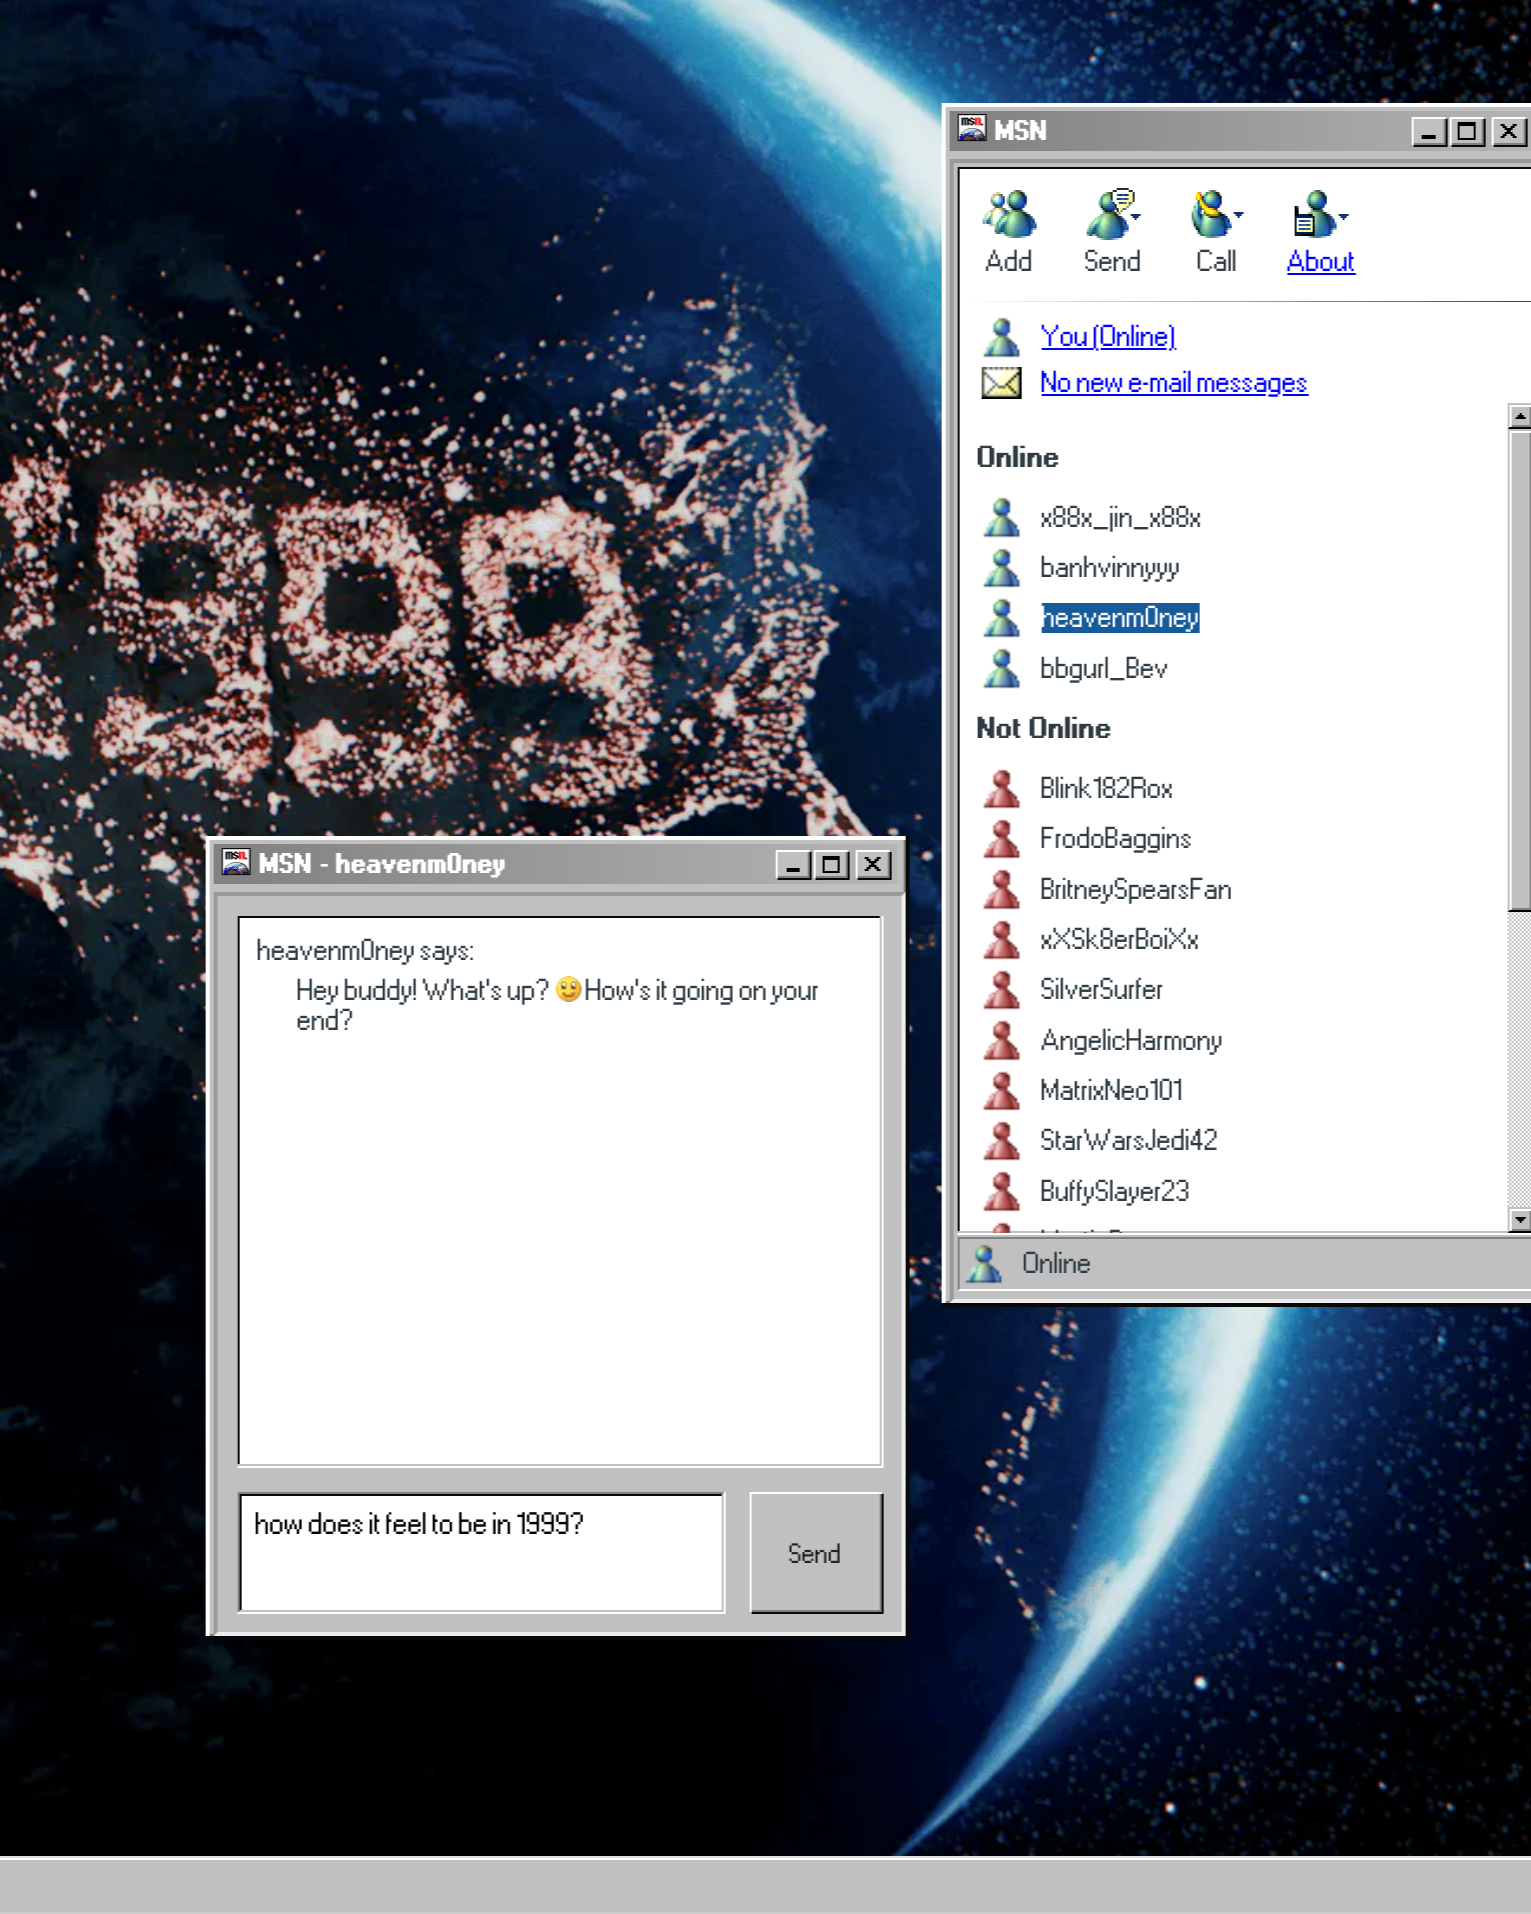 A computer screen displaying an open msn messenger window with various online contacts and an active chat, set against a backdrop of a vast starry space image.